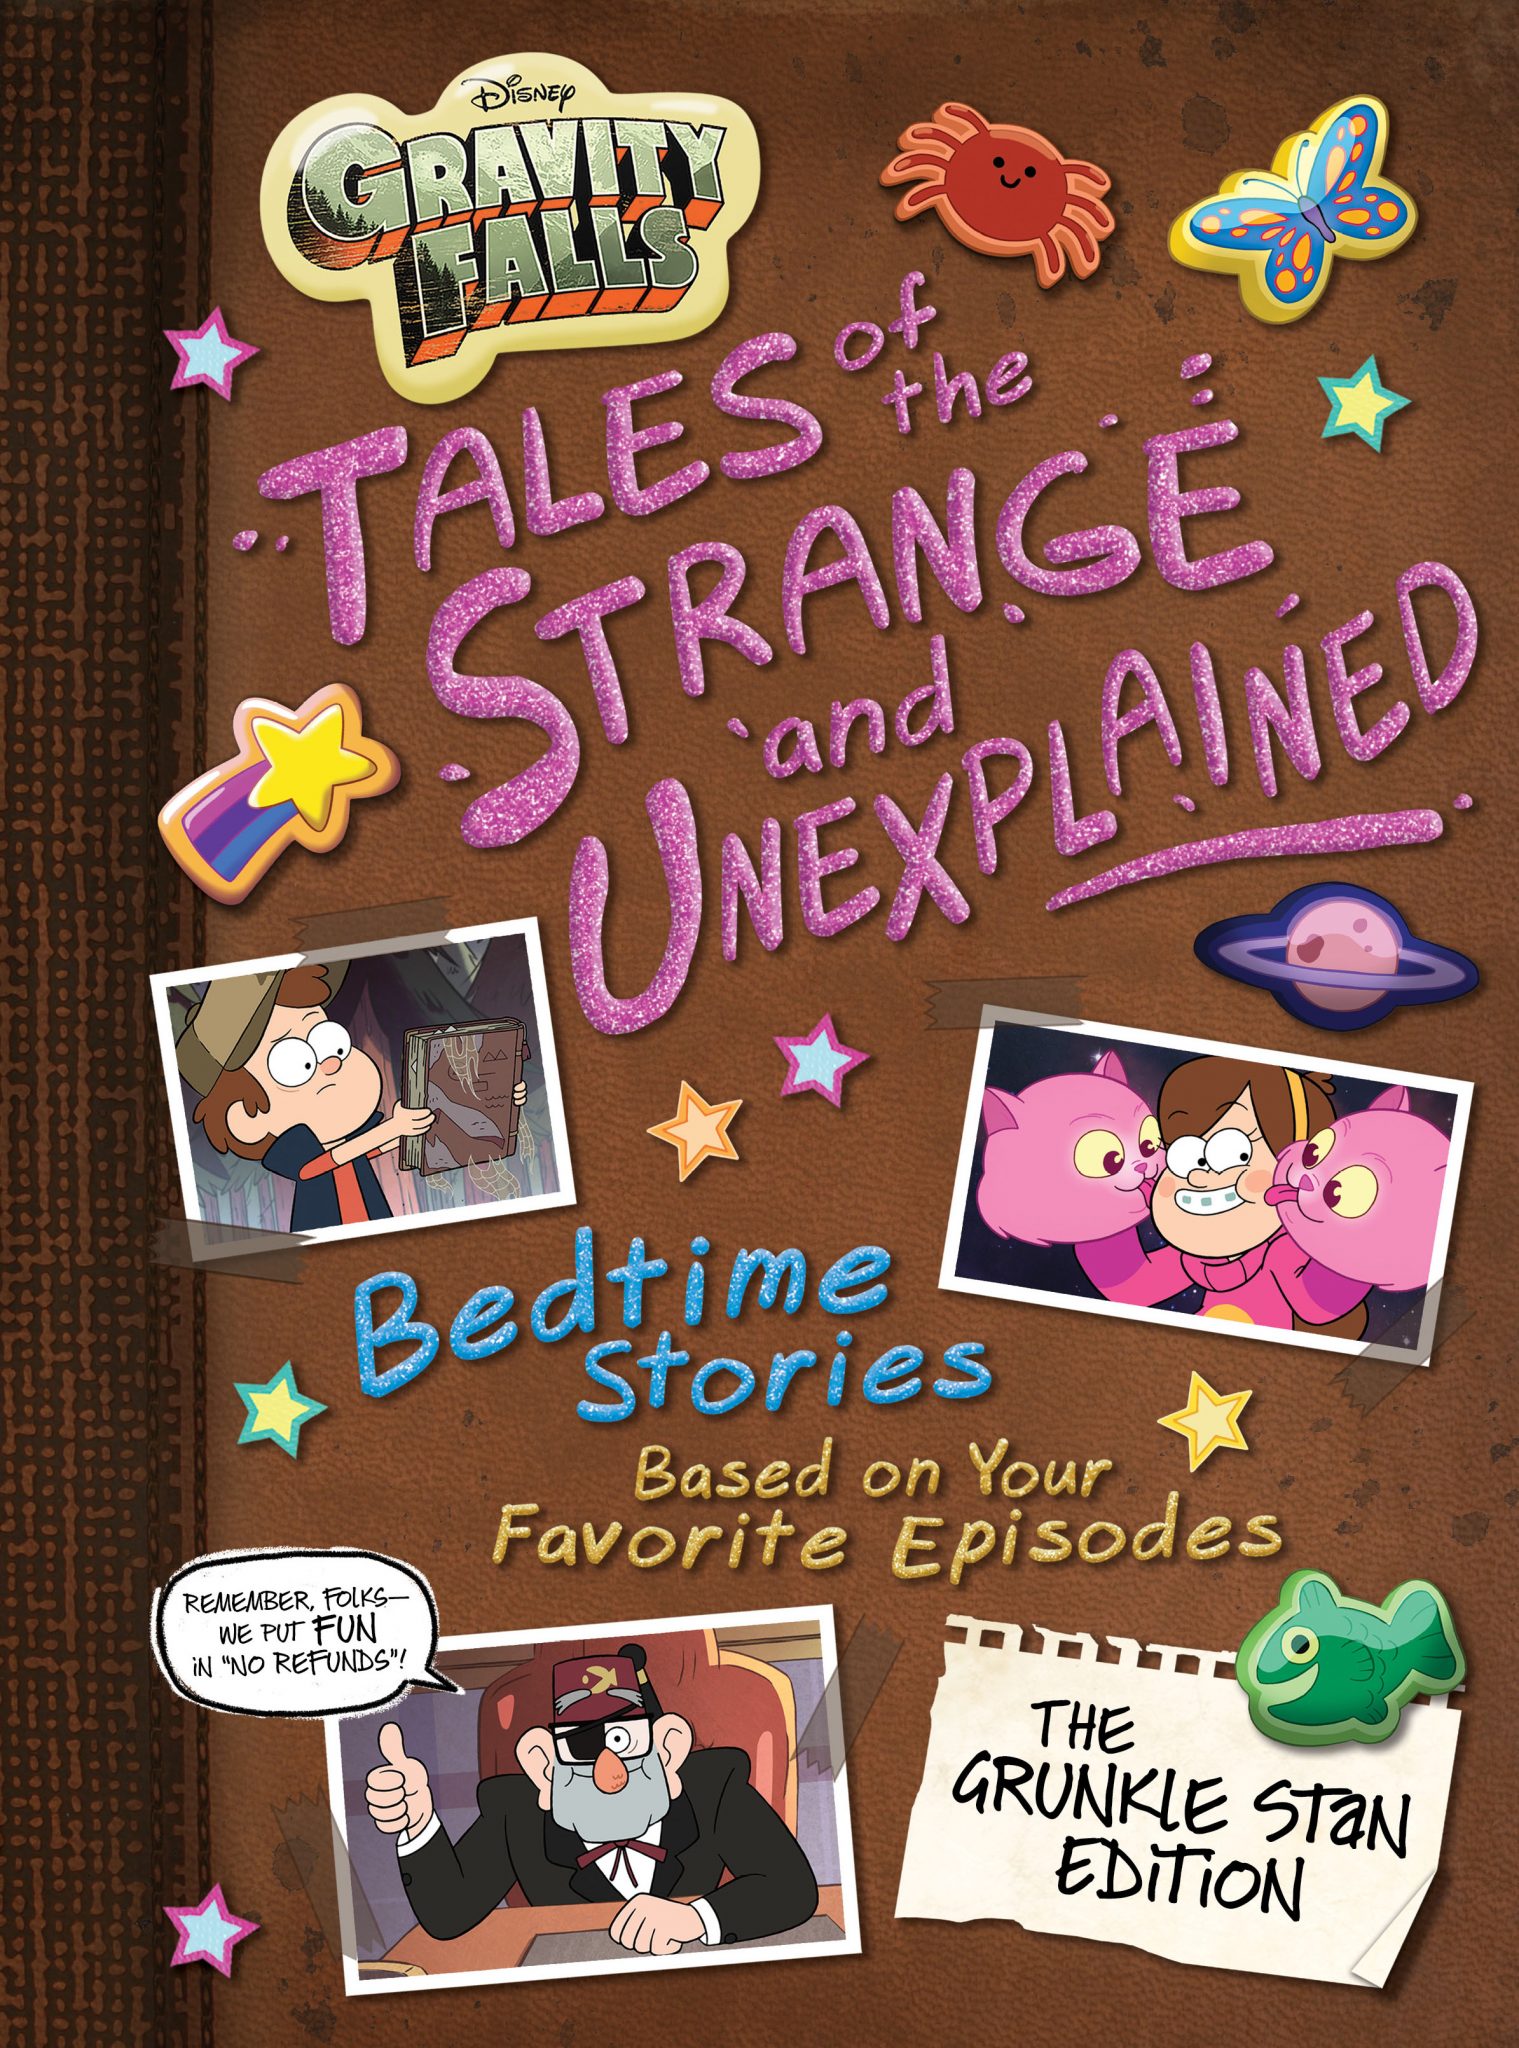 Gravity Falls Tales of the Strange and Unexplained (Bedtime Stories